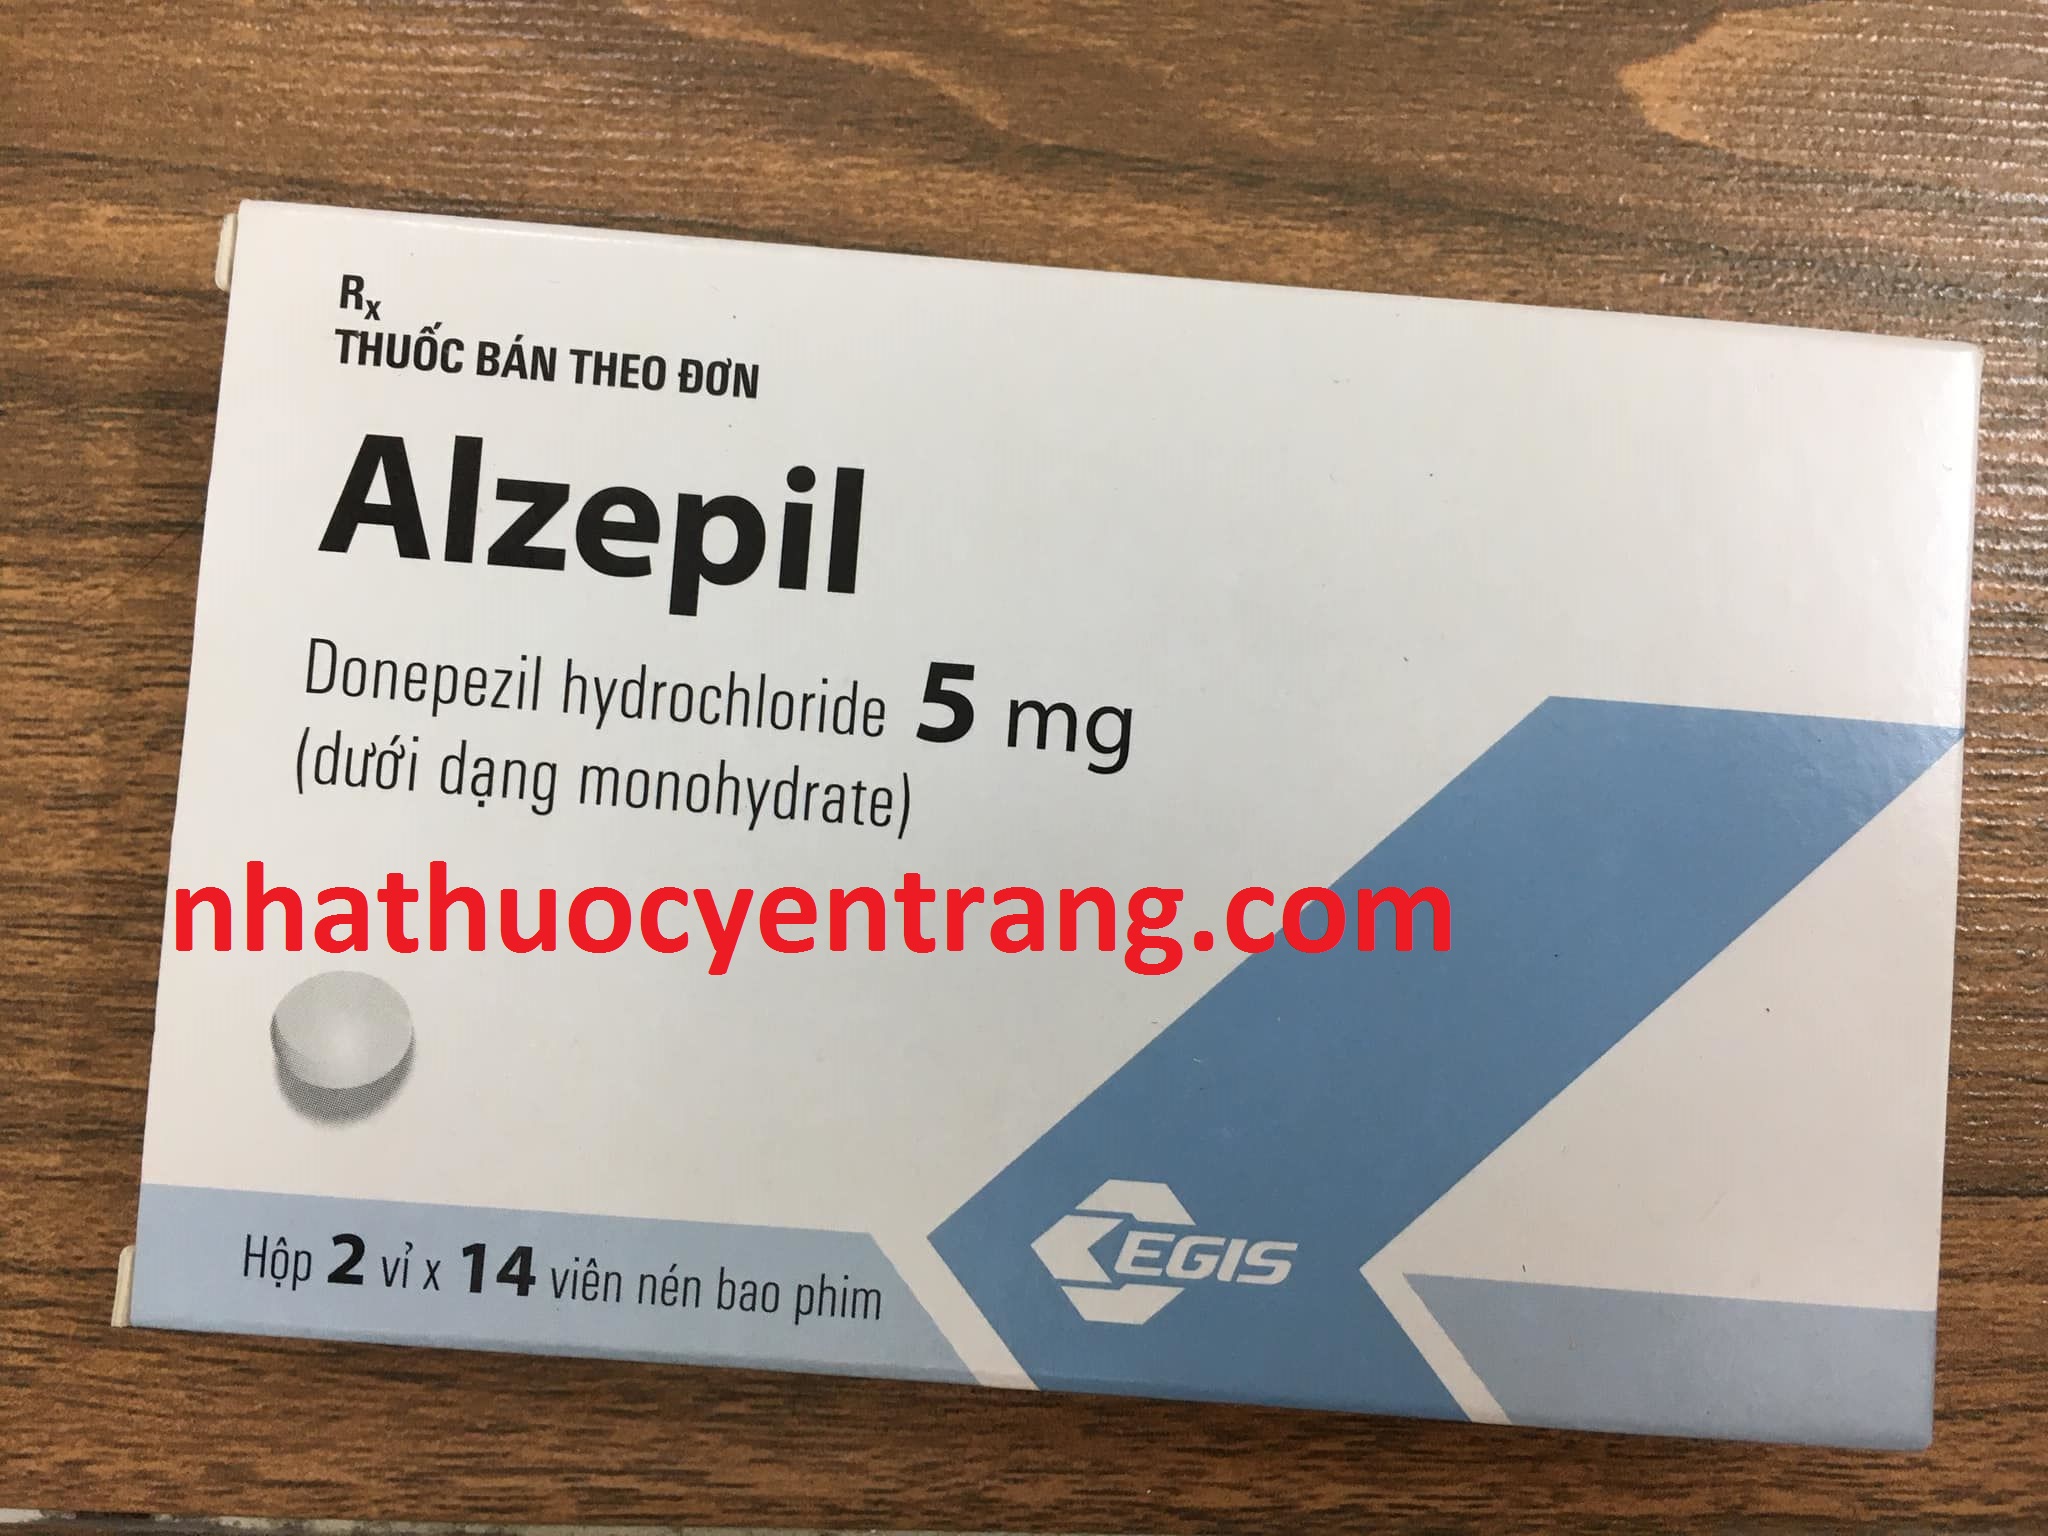 Alzepil 5mg